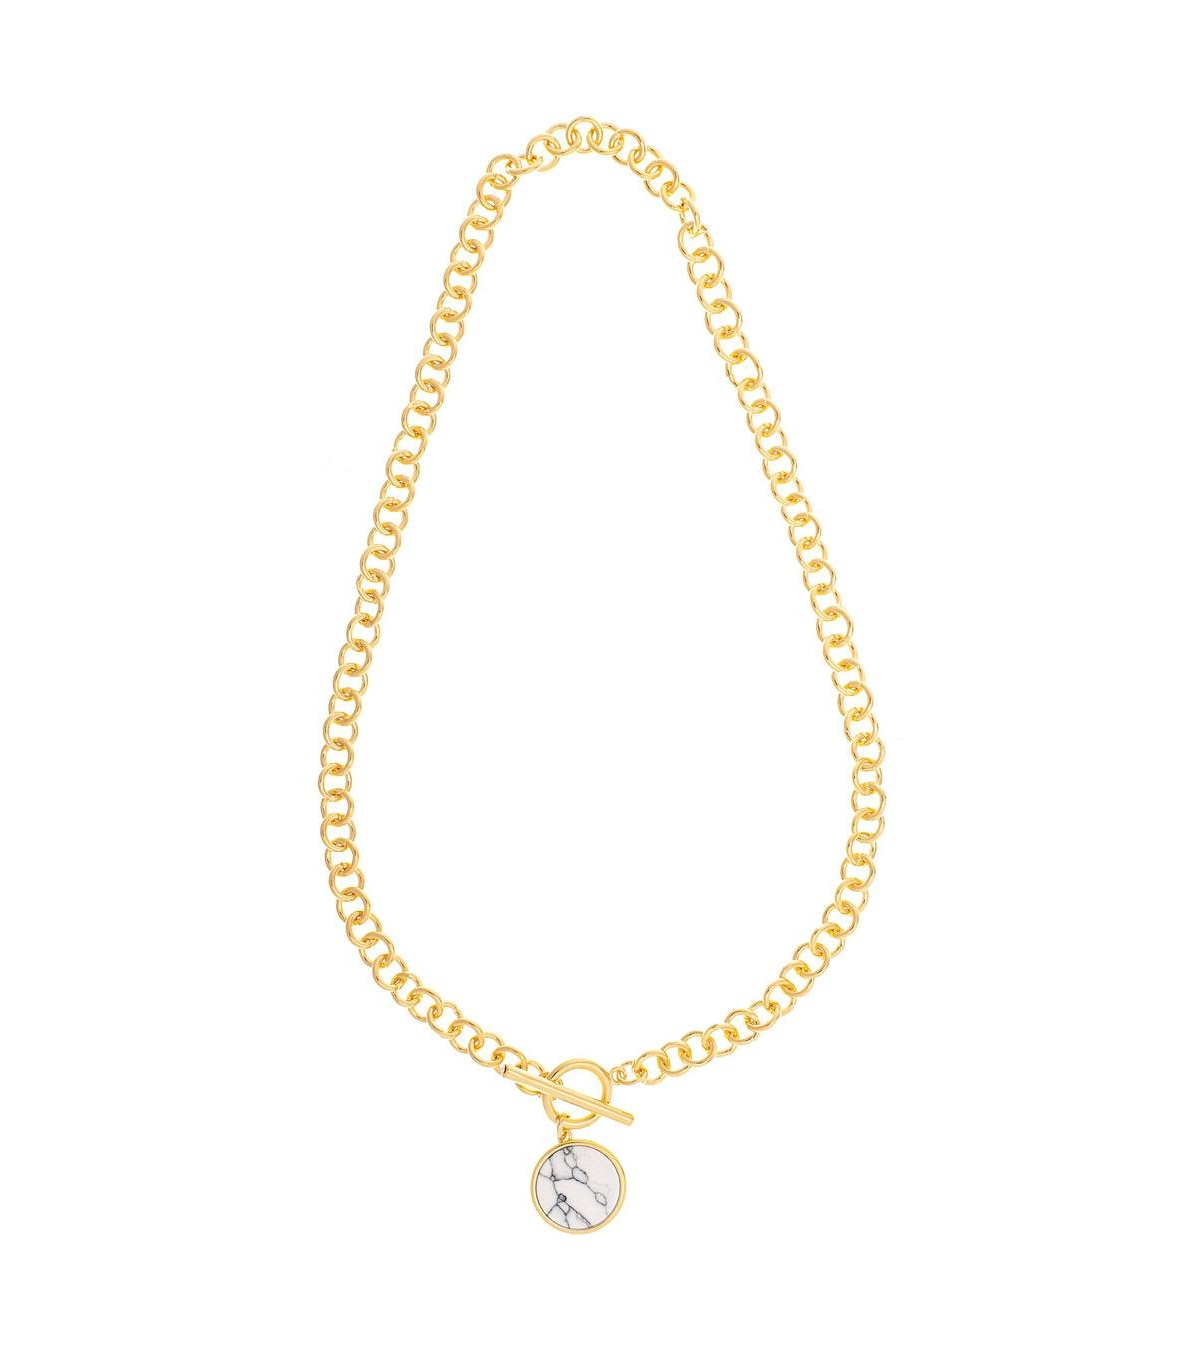 Polished Link Toggle & Charm Necklace - Gold with white  gray